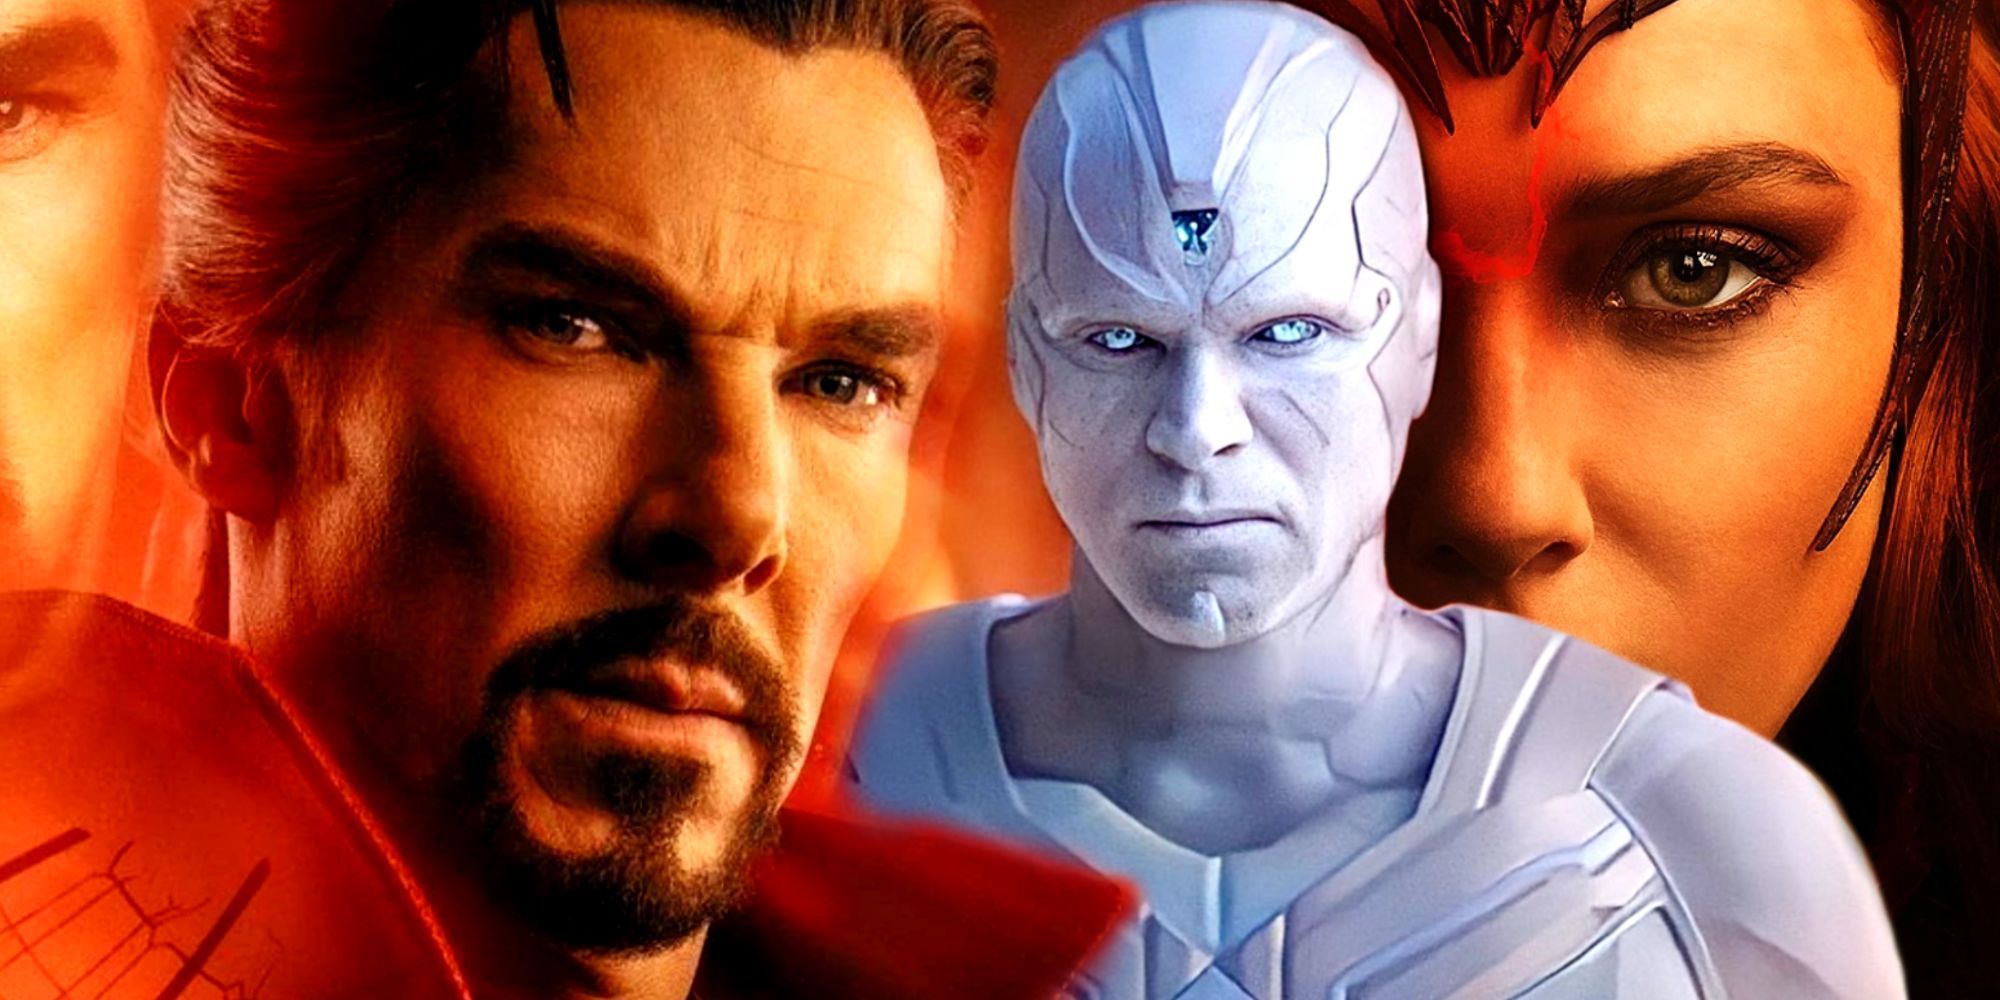 Doctor Strange, Scarlet Witch, and White Vision in The MCU Phase 4